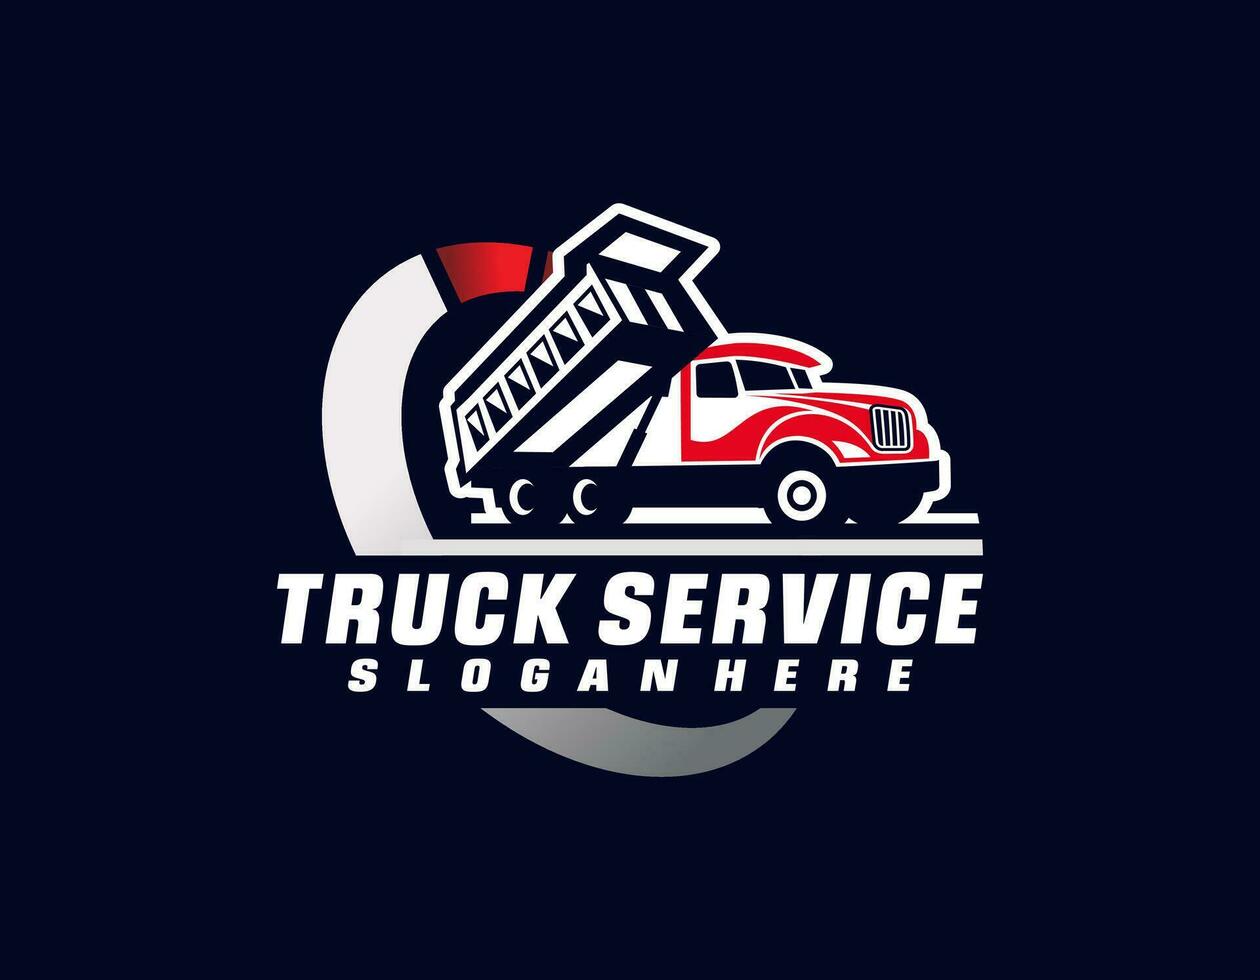 Tipper truck company logo badge vector. Best for trucking and freight related industry vector